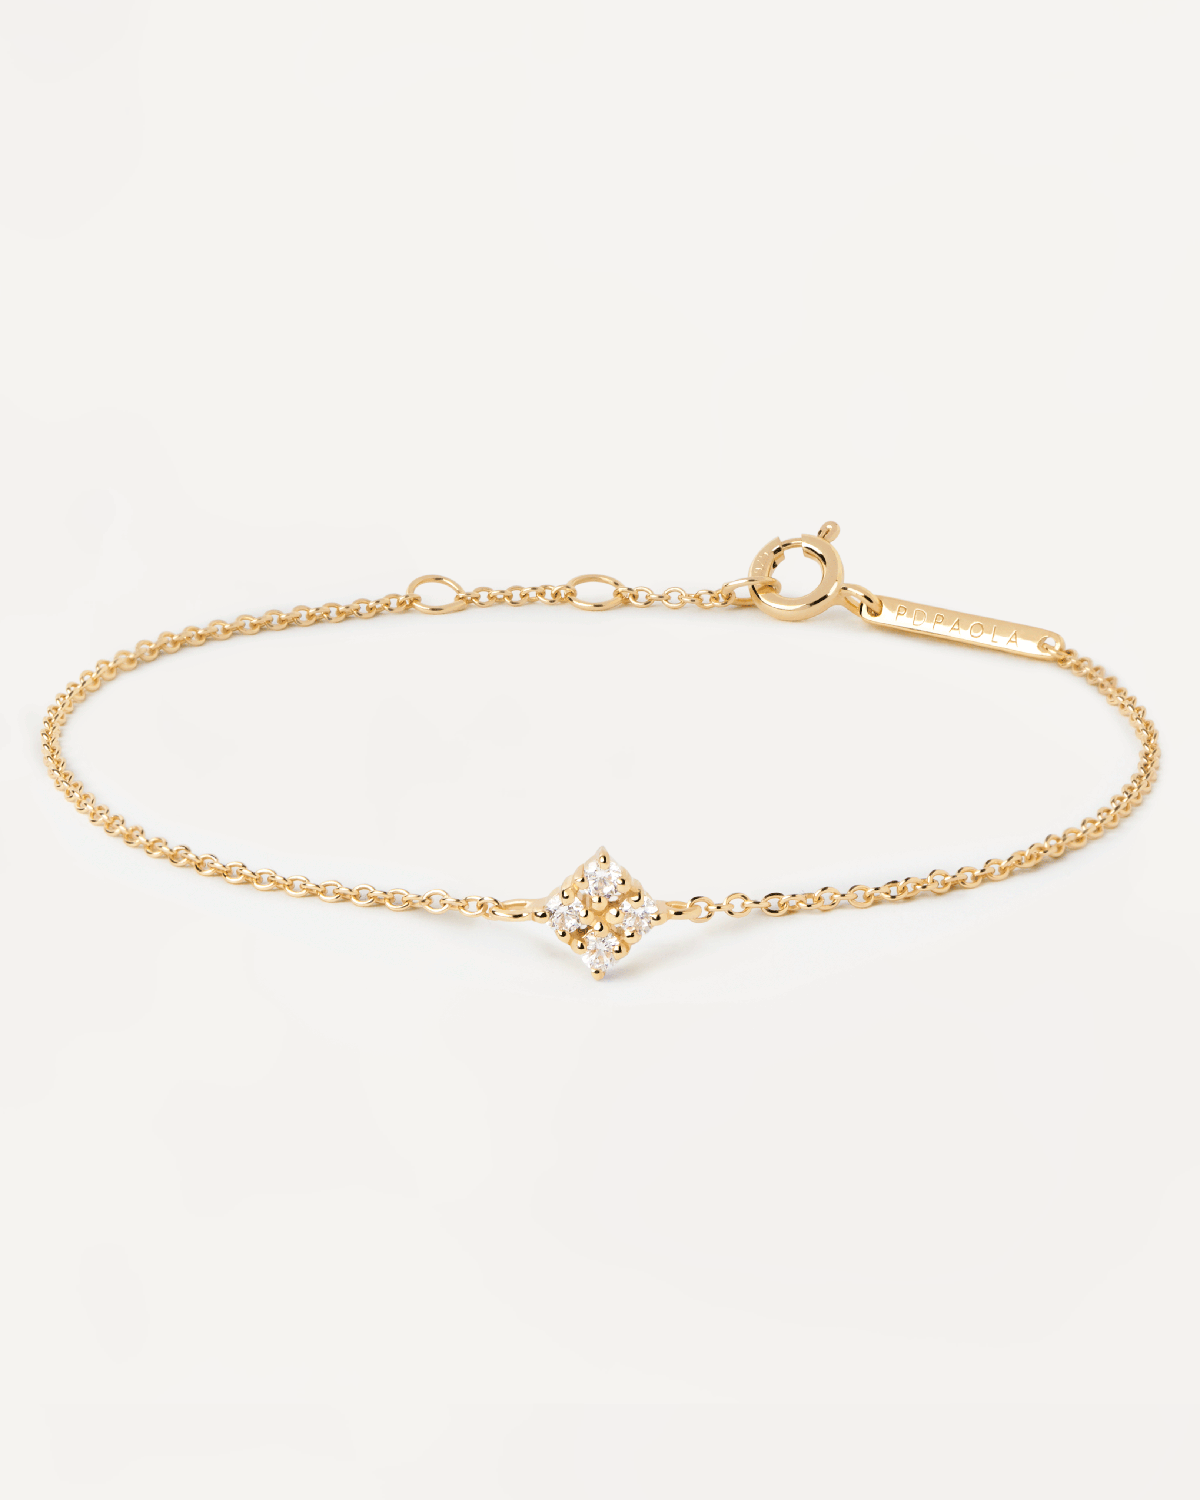 2023 Selection | Tina Bracelet. Chain bracelet in gold-plated silver with white zirconia motiv. Get the latest arrival from PDPAOLA. Place your order safely and get this Best Seller. Free Shipping.